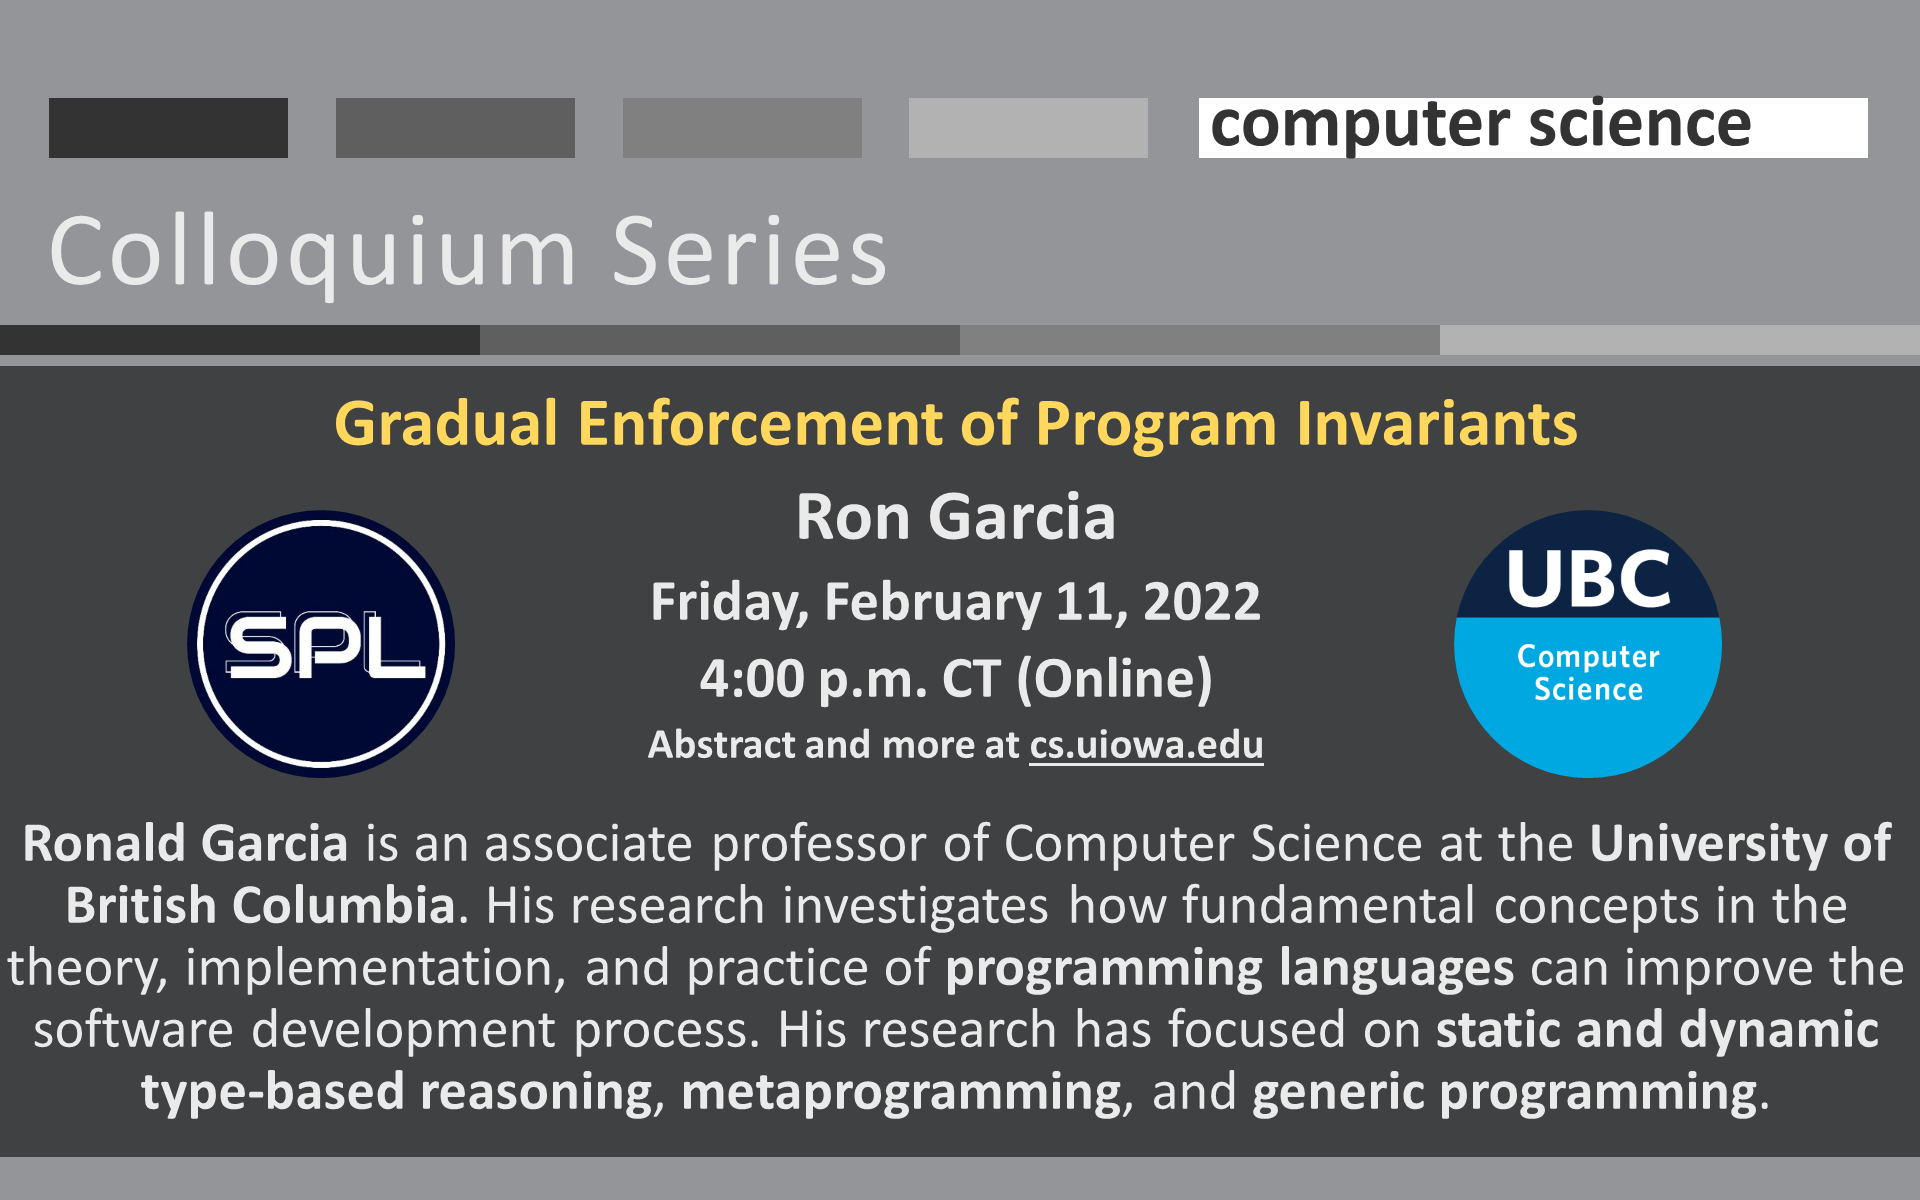 University of Iowa Computer Science Colloquium Series: Gradual Enforcement of Program Invariants Ron Garcia Friday, February 11, 2022 4:00 p.m. CT (Online) Abstract and more at cs.uiowa.edu  Ronald Garcia is an associate professor of Computer Science at the University of British Columbia. His research investigates how fundamental concepts in the theory, implementation, and practice of programming languages can improve the software development process. His research has focused on static and dynamic type-based reasoning, metaprogramming, and generic programming.